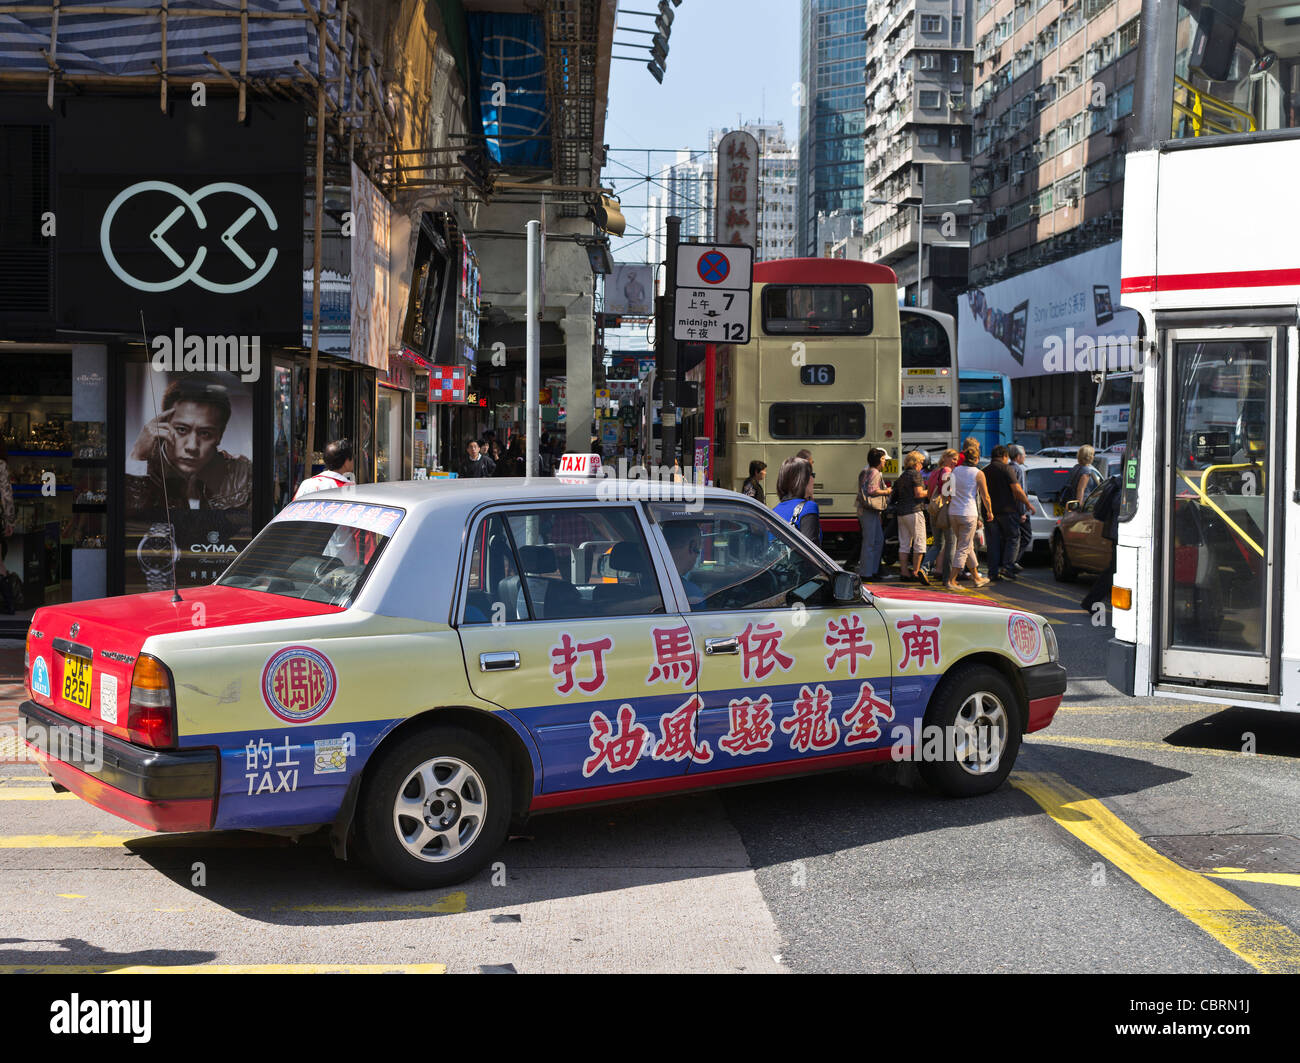 dh  MONG KOK HONG KONG Red Taxi with calligraphy advert in crowded traffic busy street people Stock Photo